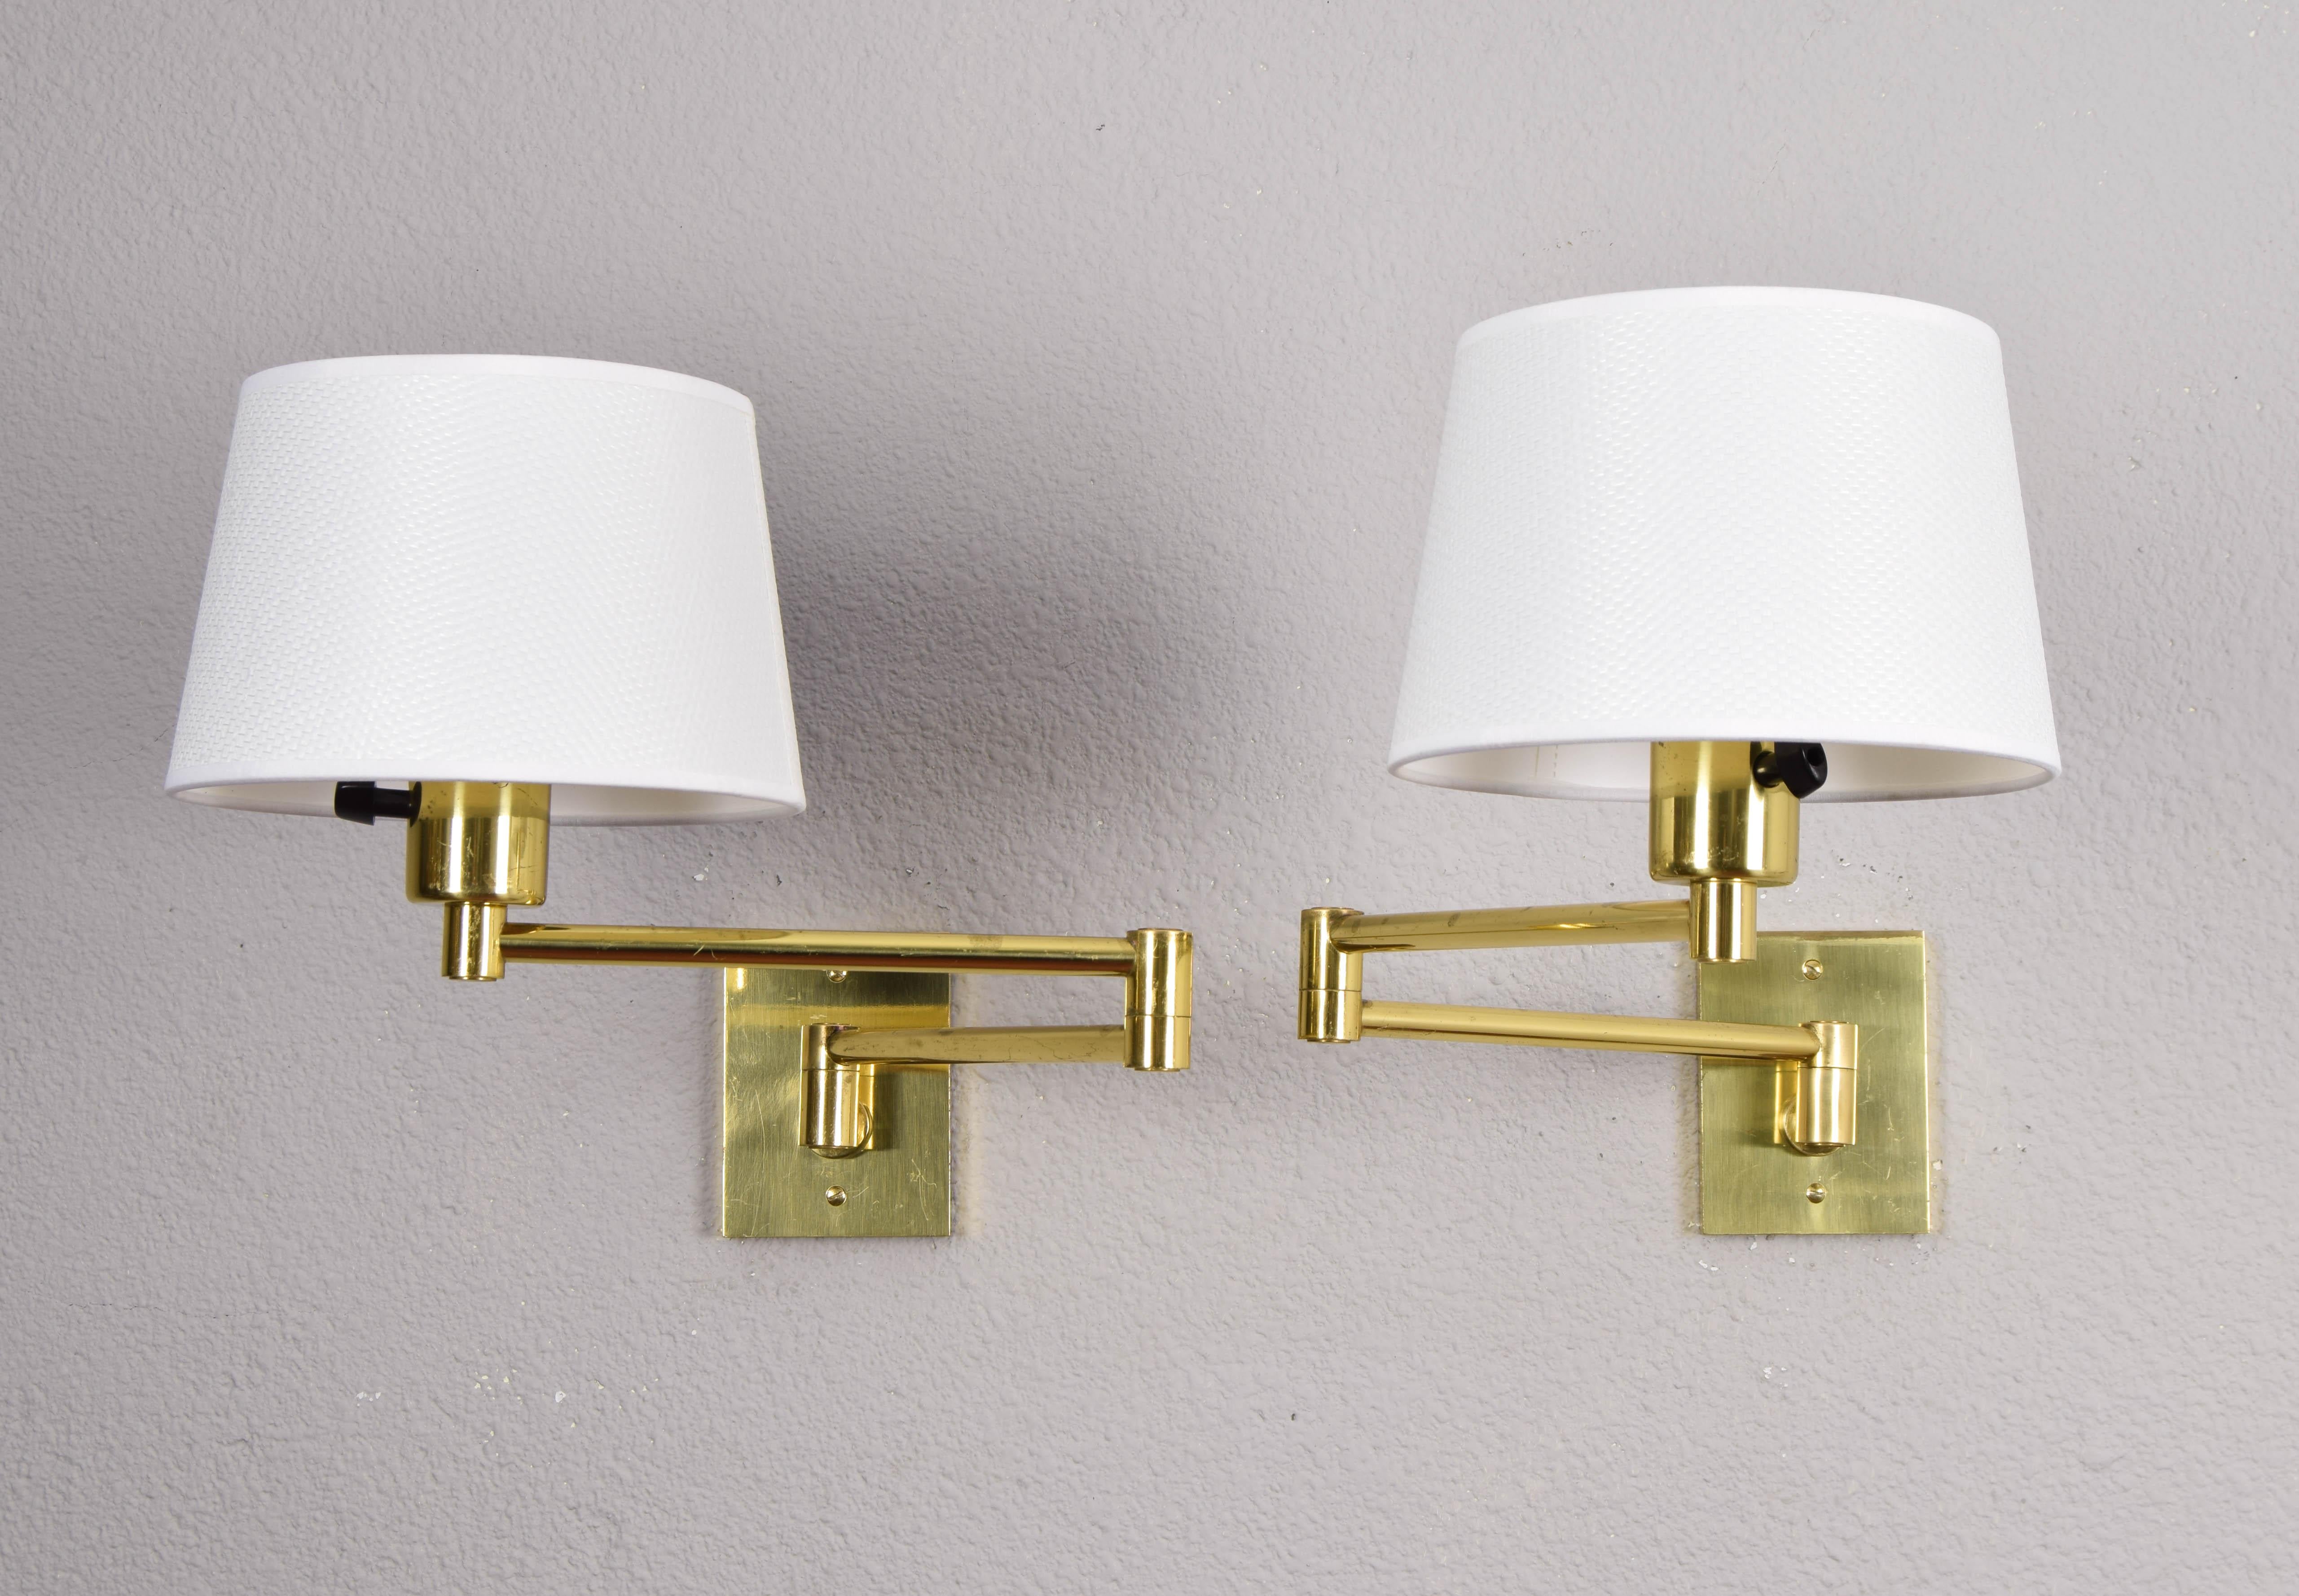 Pair of wall lamps designed by George W. Hansen in the 1960s and produced by the Spanish firm Metalarte with permission from Hansen Lamps New York in the 1970s. Brass structure and articulated arm.
The brass has areas of wear and scratches as can be